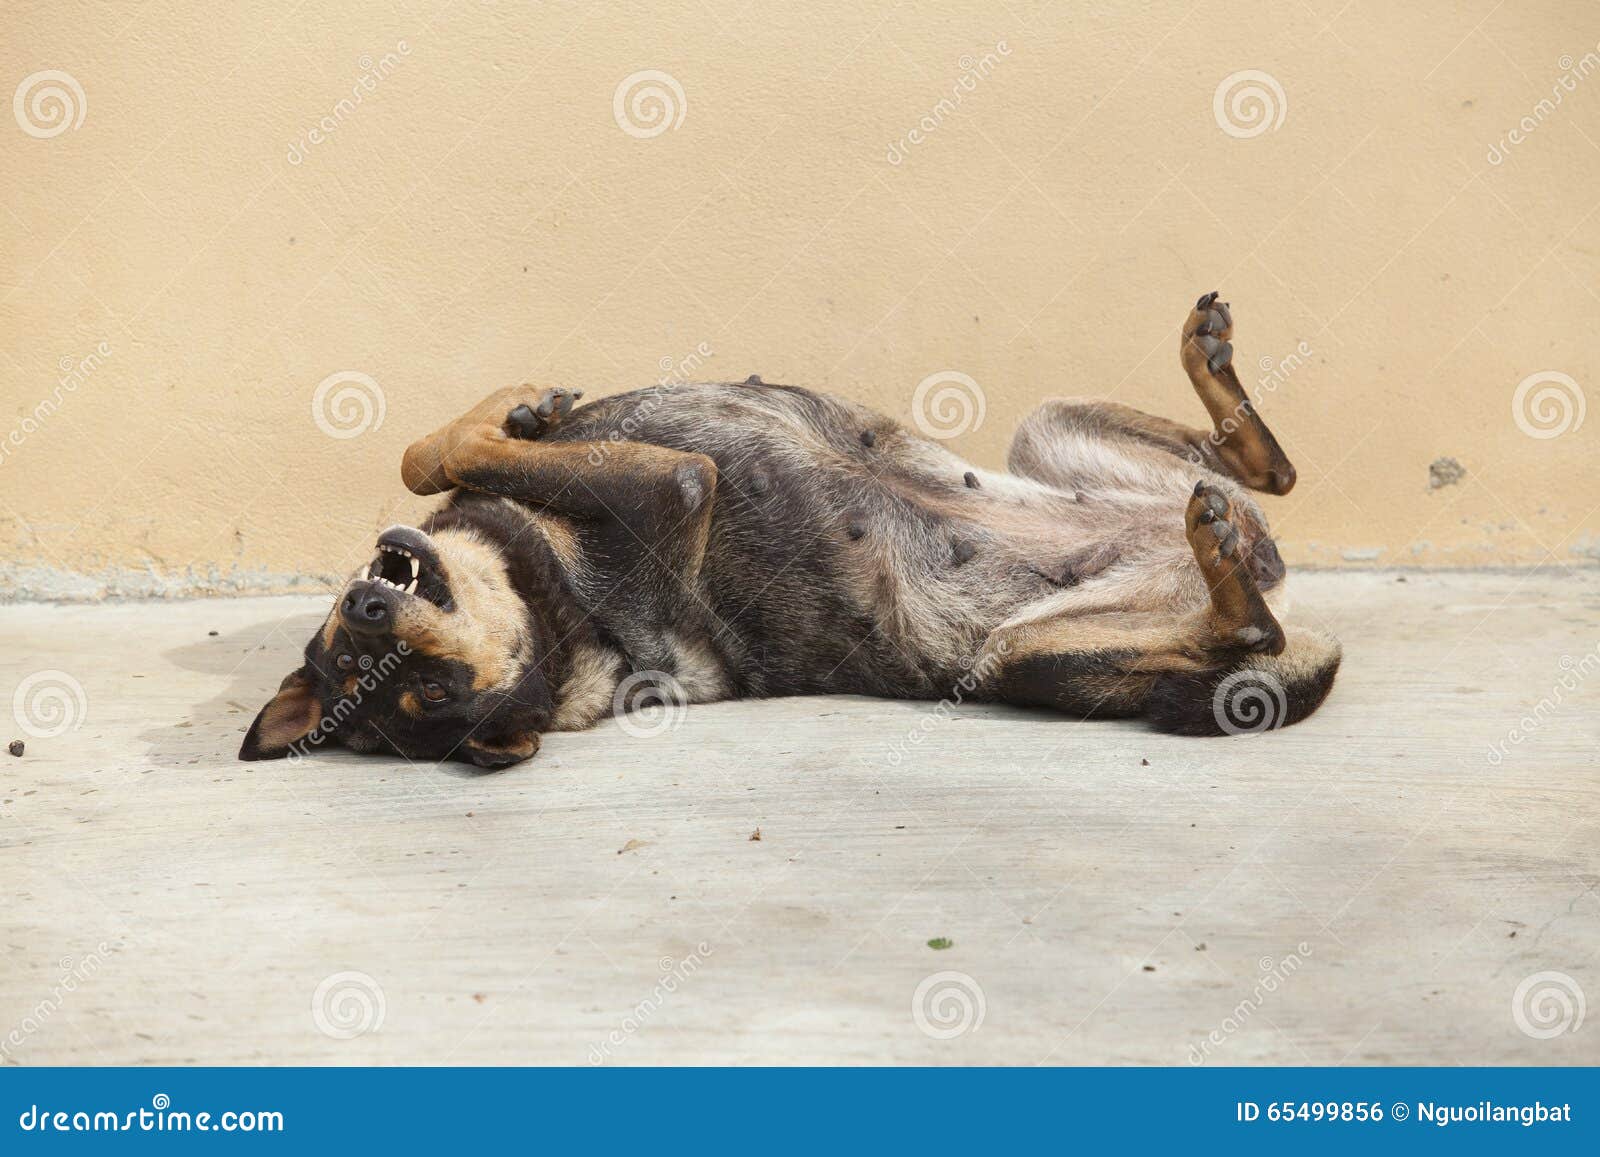 asian dog laying down in overturn position